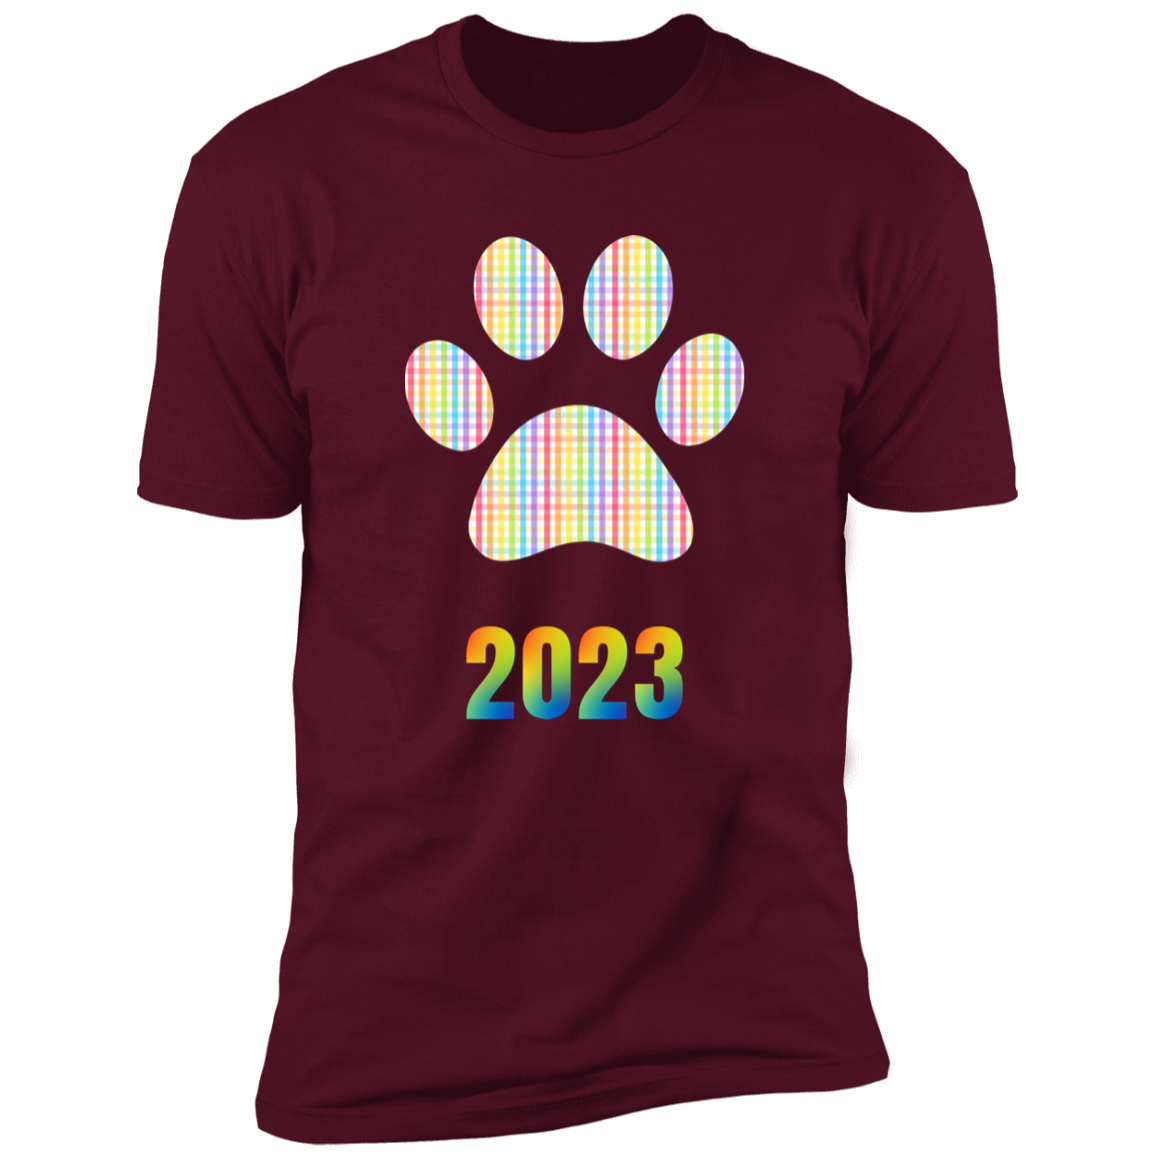 Pride Paw 2023 (Gingham) Pride T-shirt, Paw Pride Dog Shirt for humans, in maroon